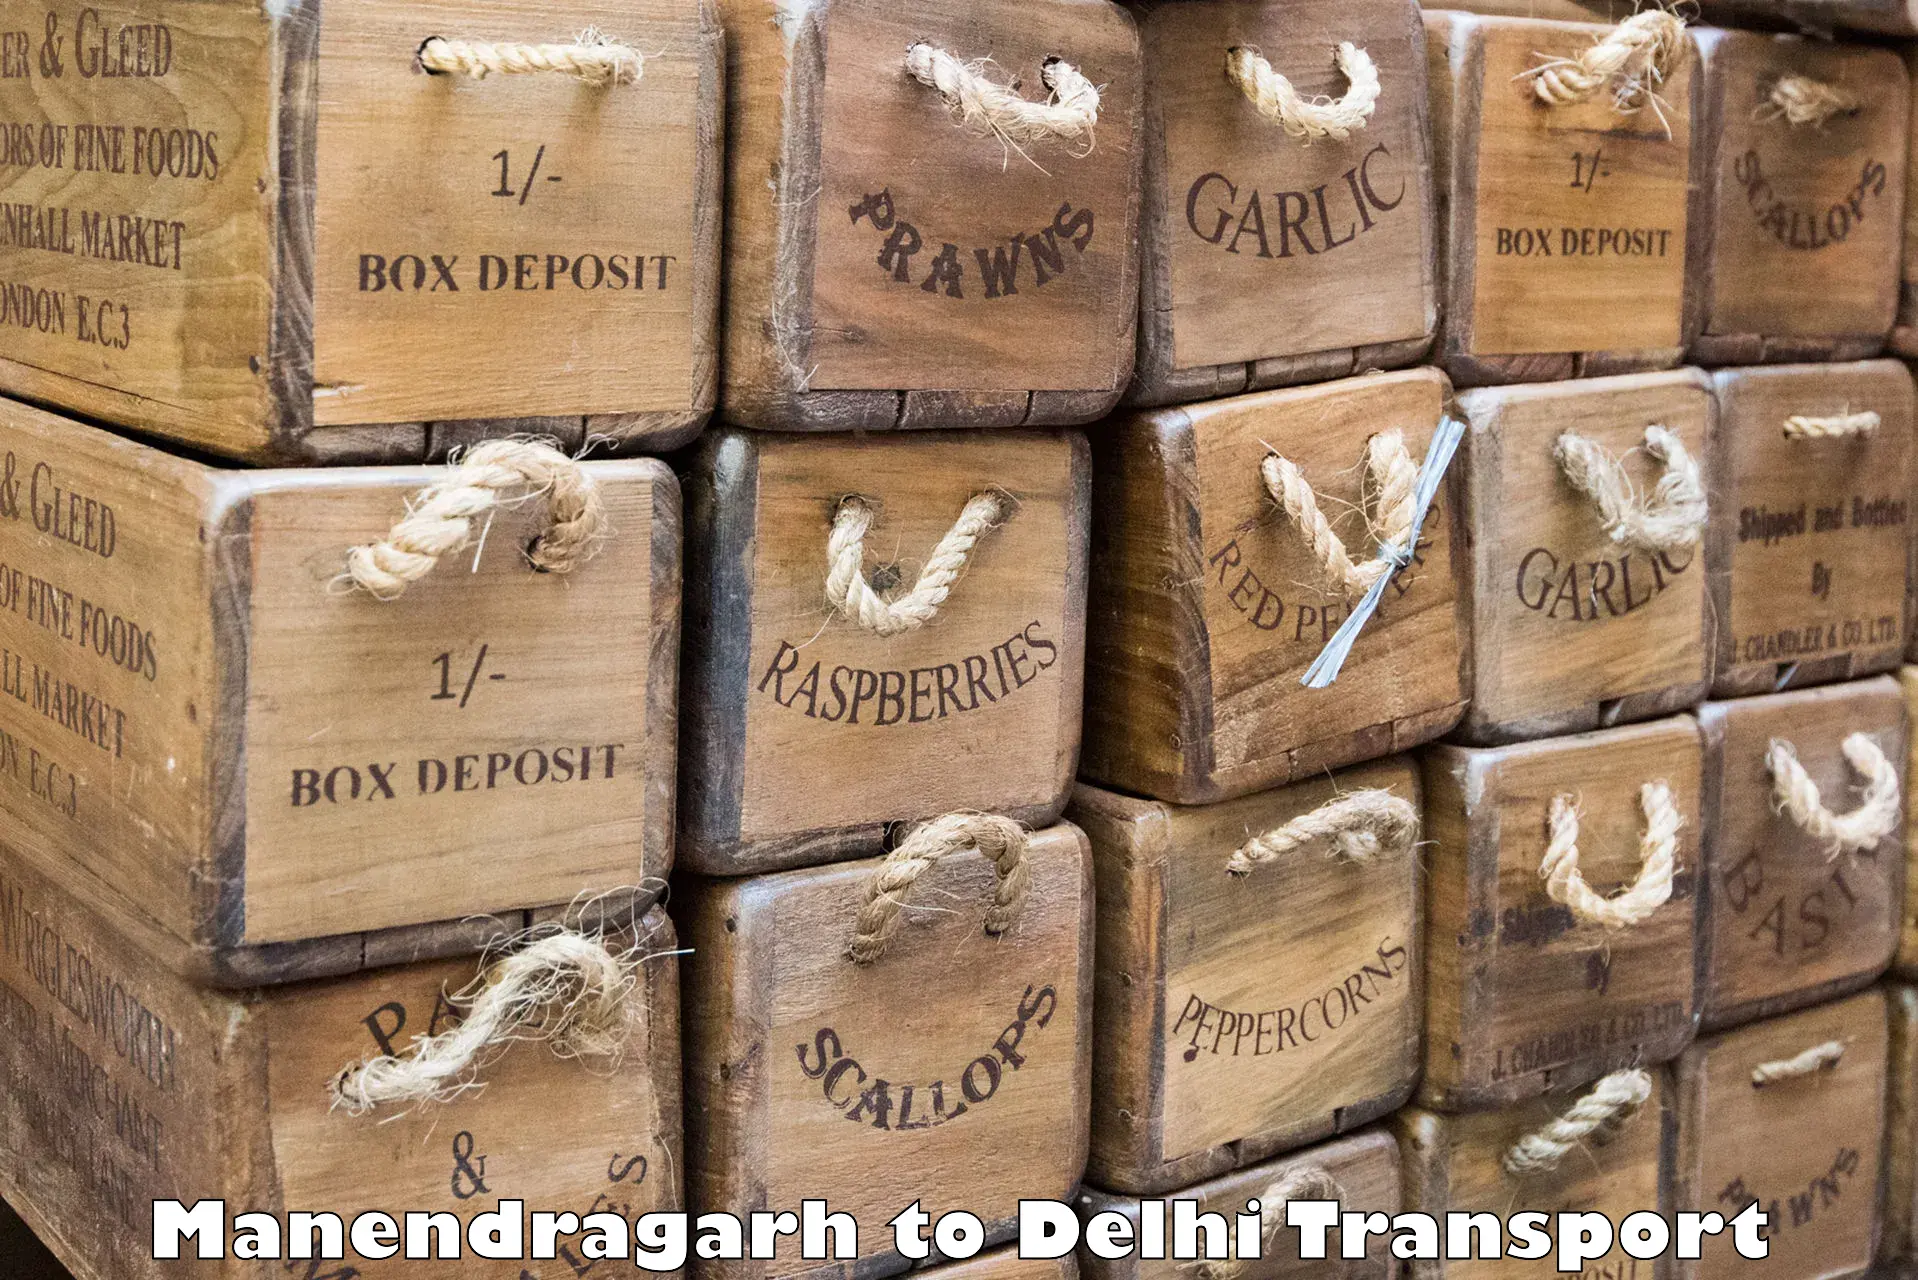 Air cargo transport services Manendragarh to NCR